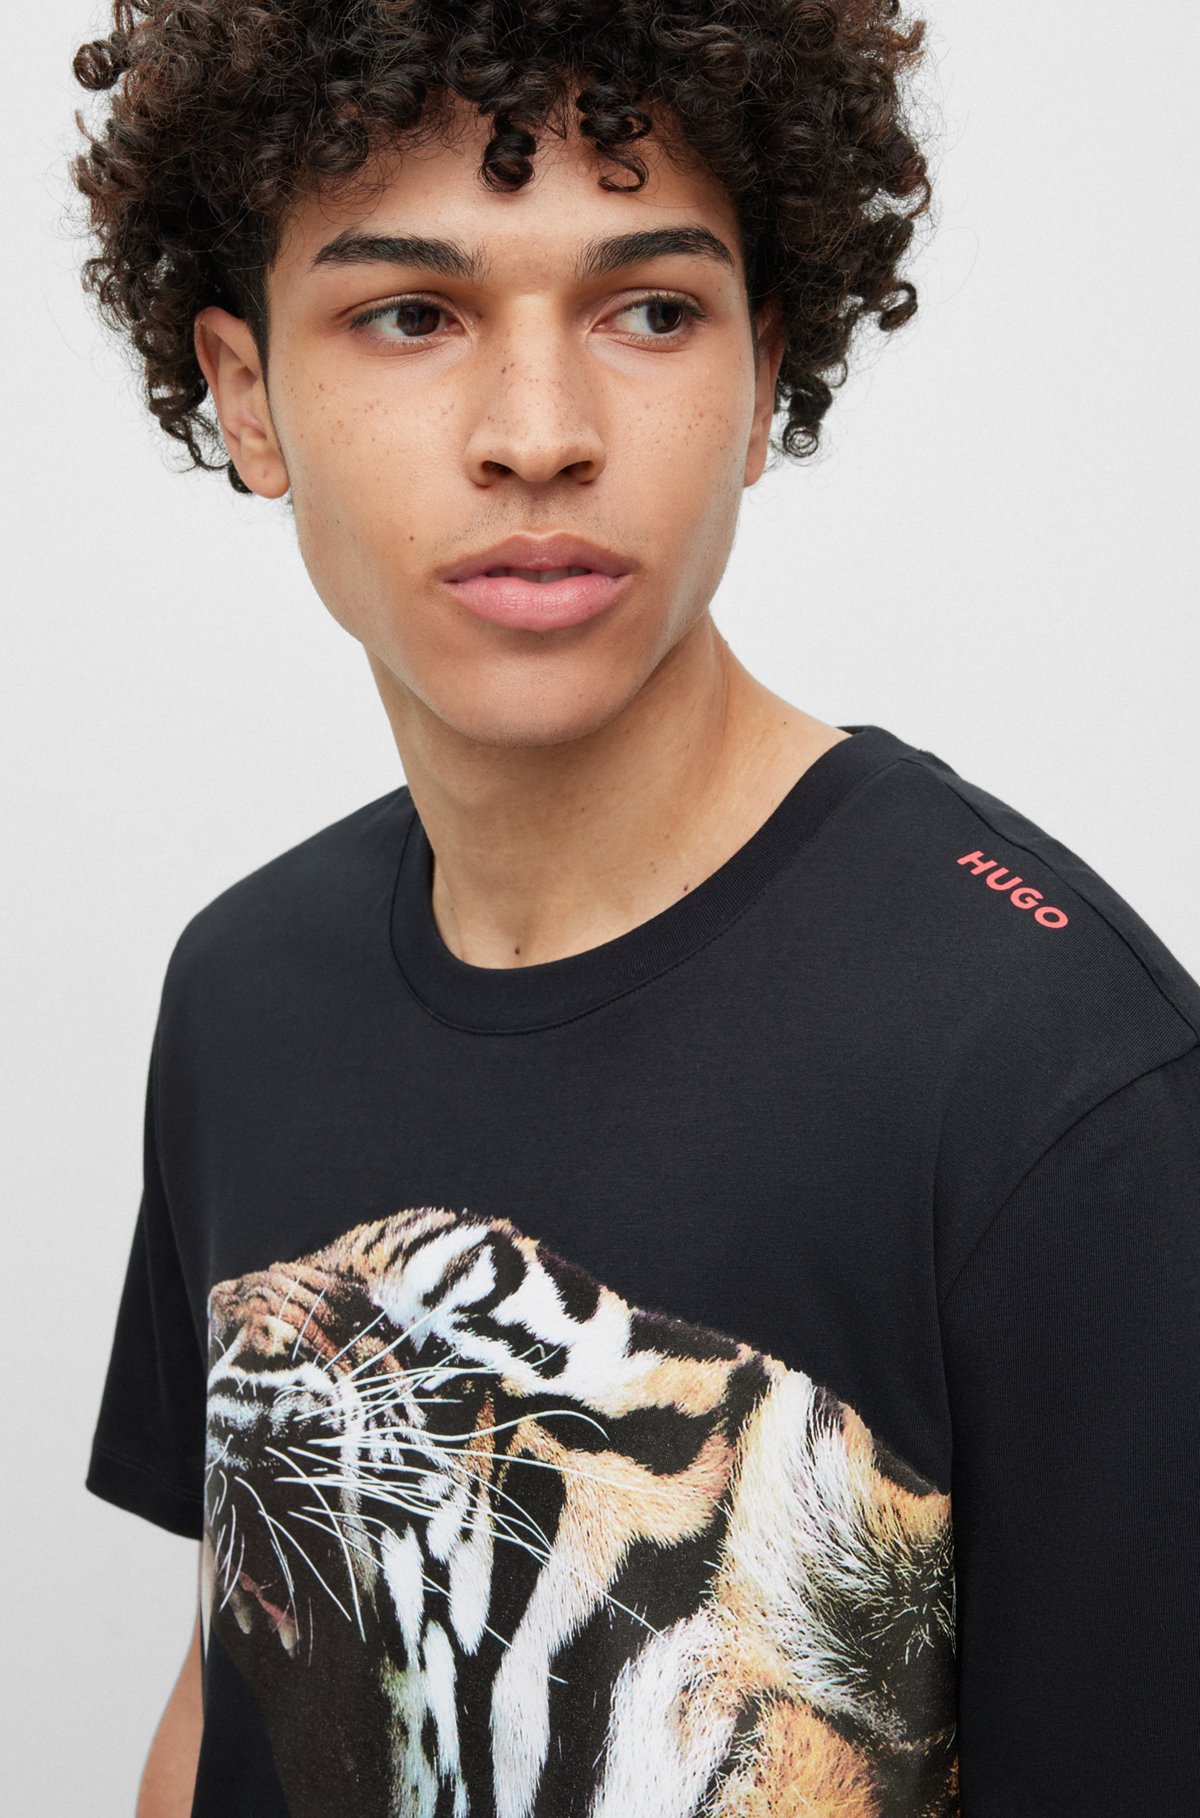 HUGO - Cotton-jersey T-shirt with tiger graphic